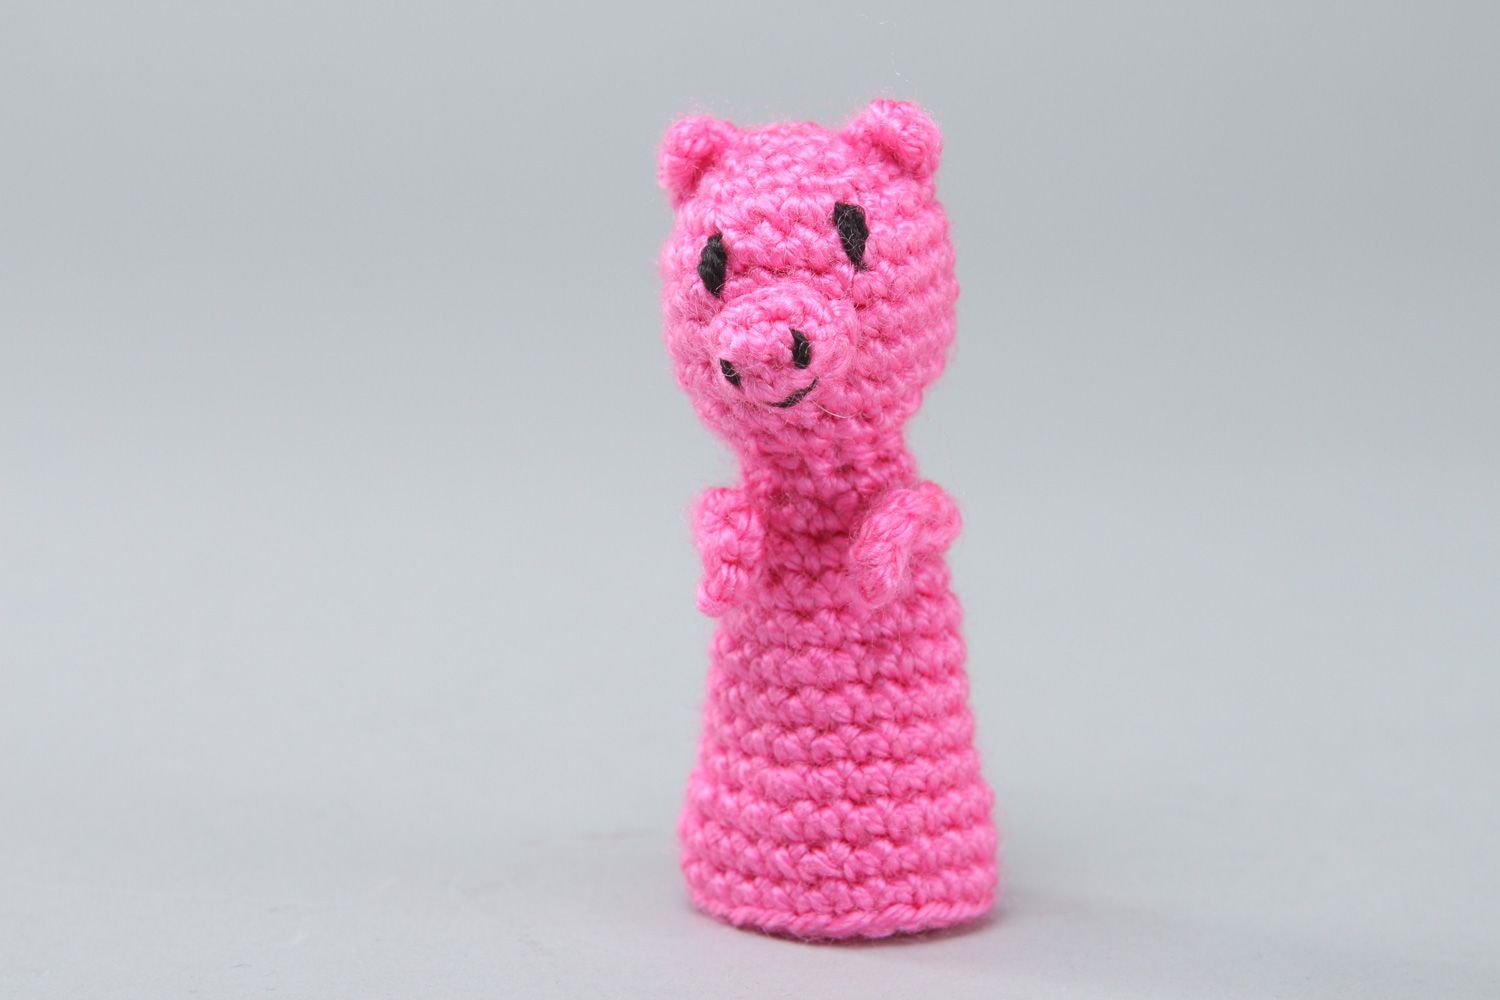 Handmade finger puppet in the shape of pink pig crocheted of acrylic threads photo 1